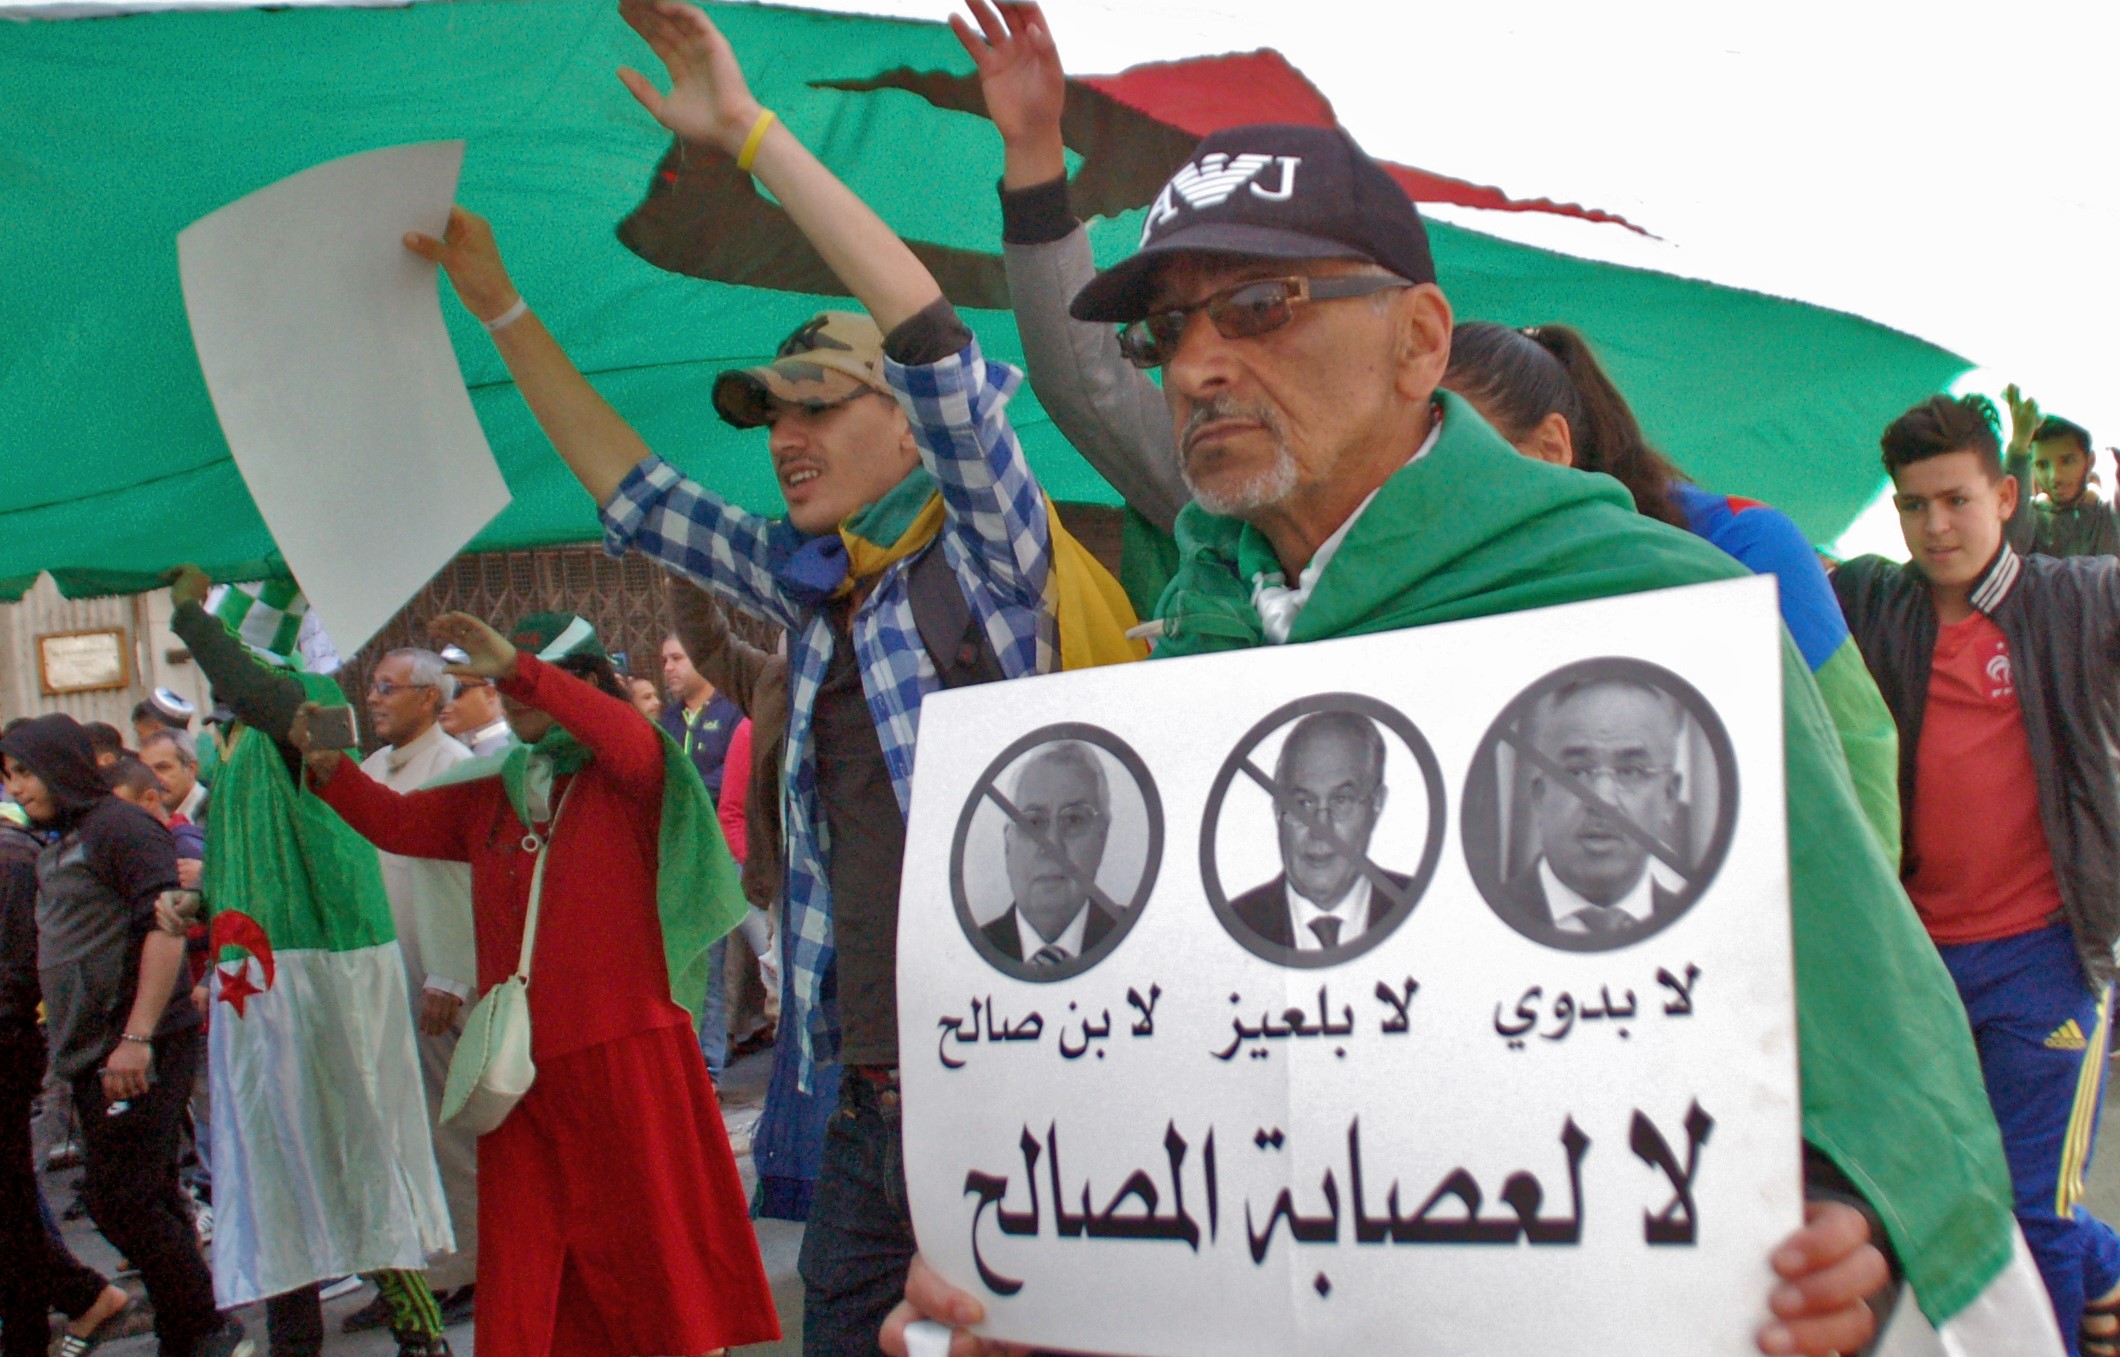 An Algerian man marches with a sign against the "3B" (Interim leader Abdelakder Bensalah, constitutional council chief Tayeb Belaiz and Prime Minister Noureddine Bedoui)in the city of Oran on 9 April (AFP)